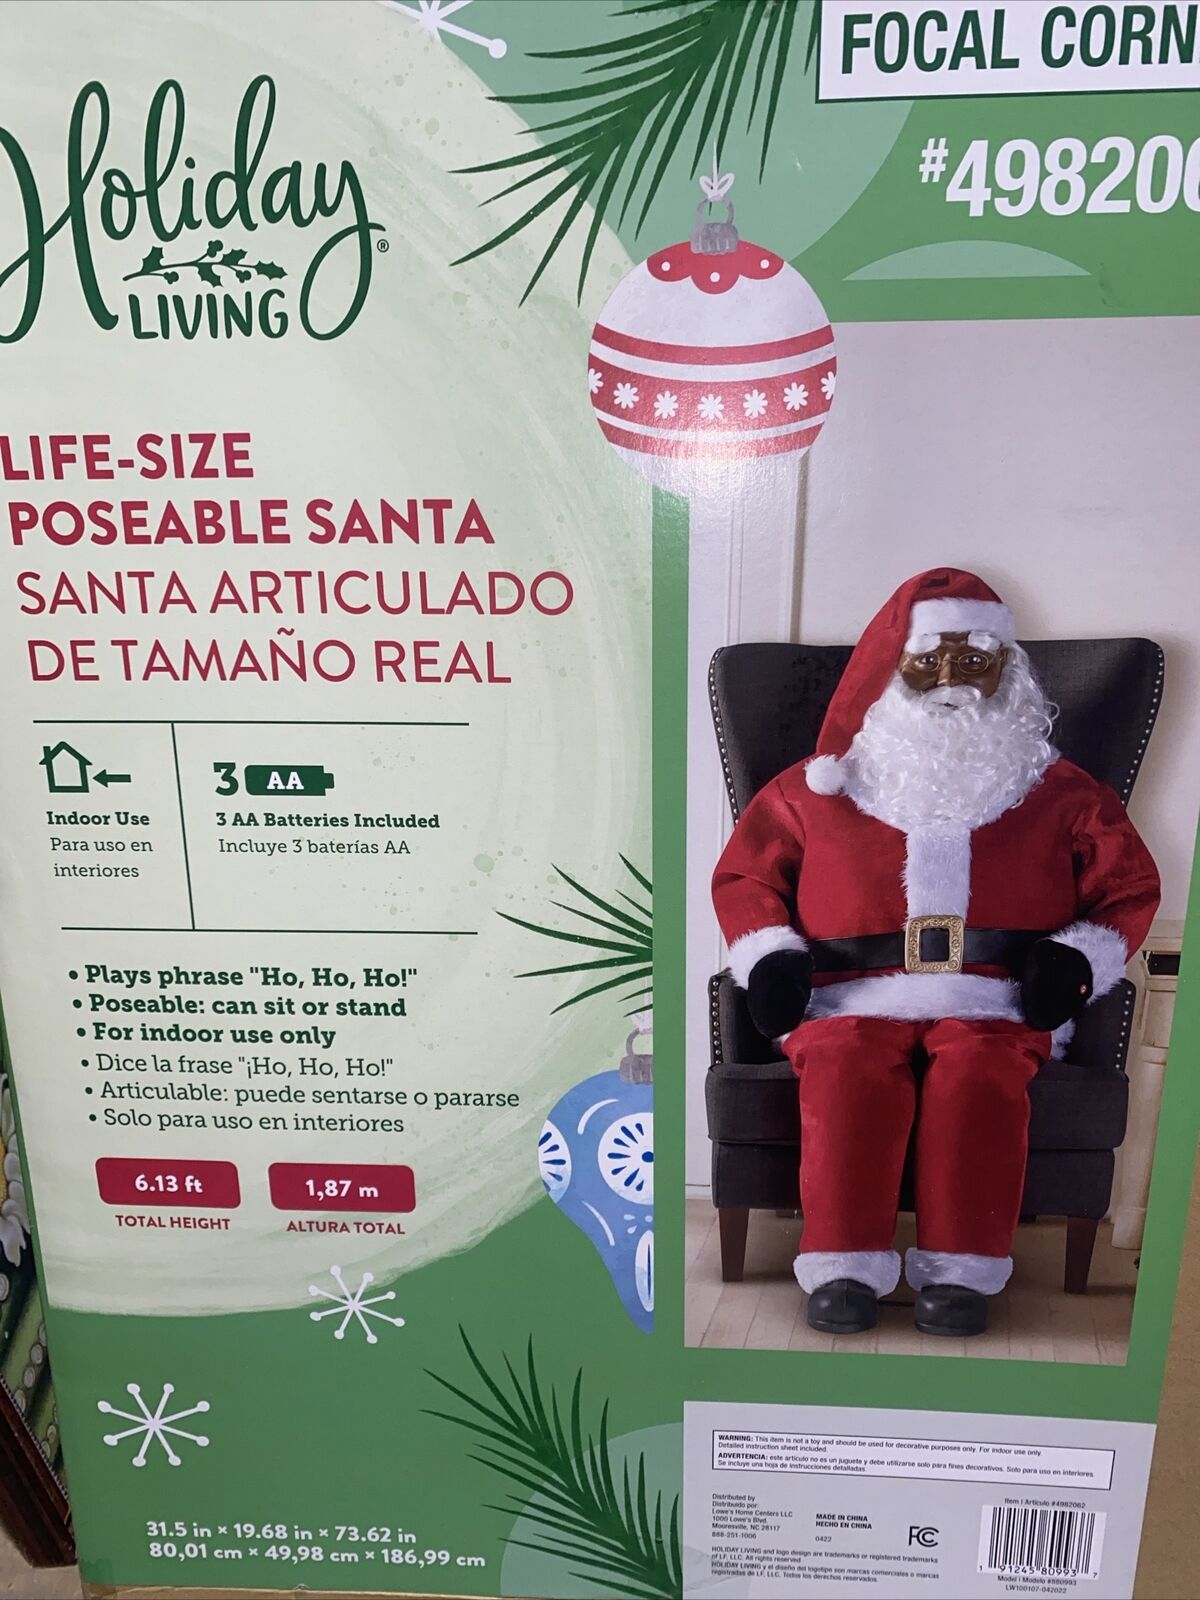 Holiday Living 6 ft Life-Size Poseable Talking Santa Claus Christmas New Sealed